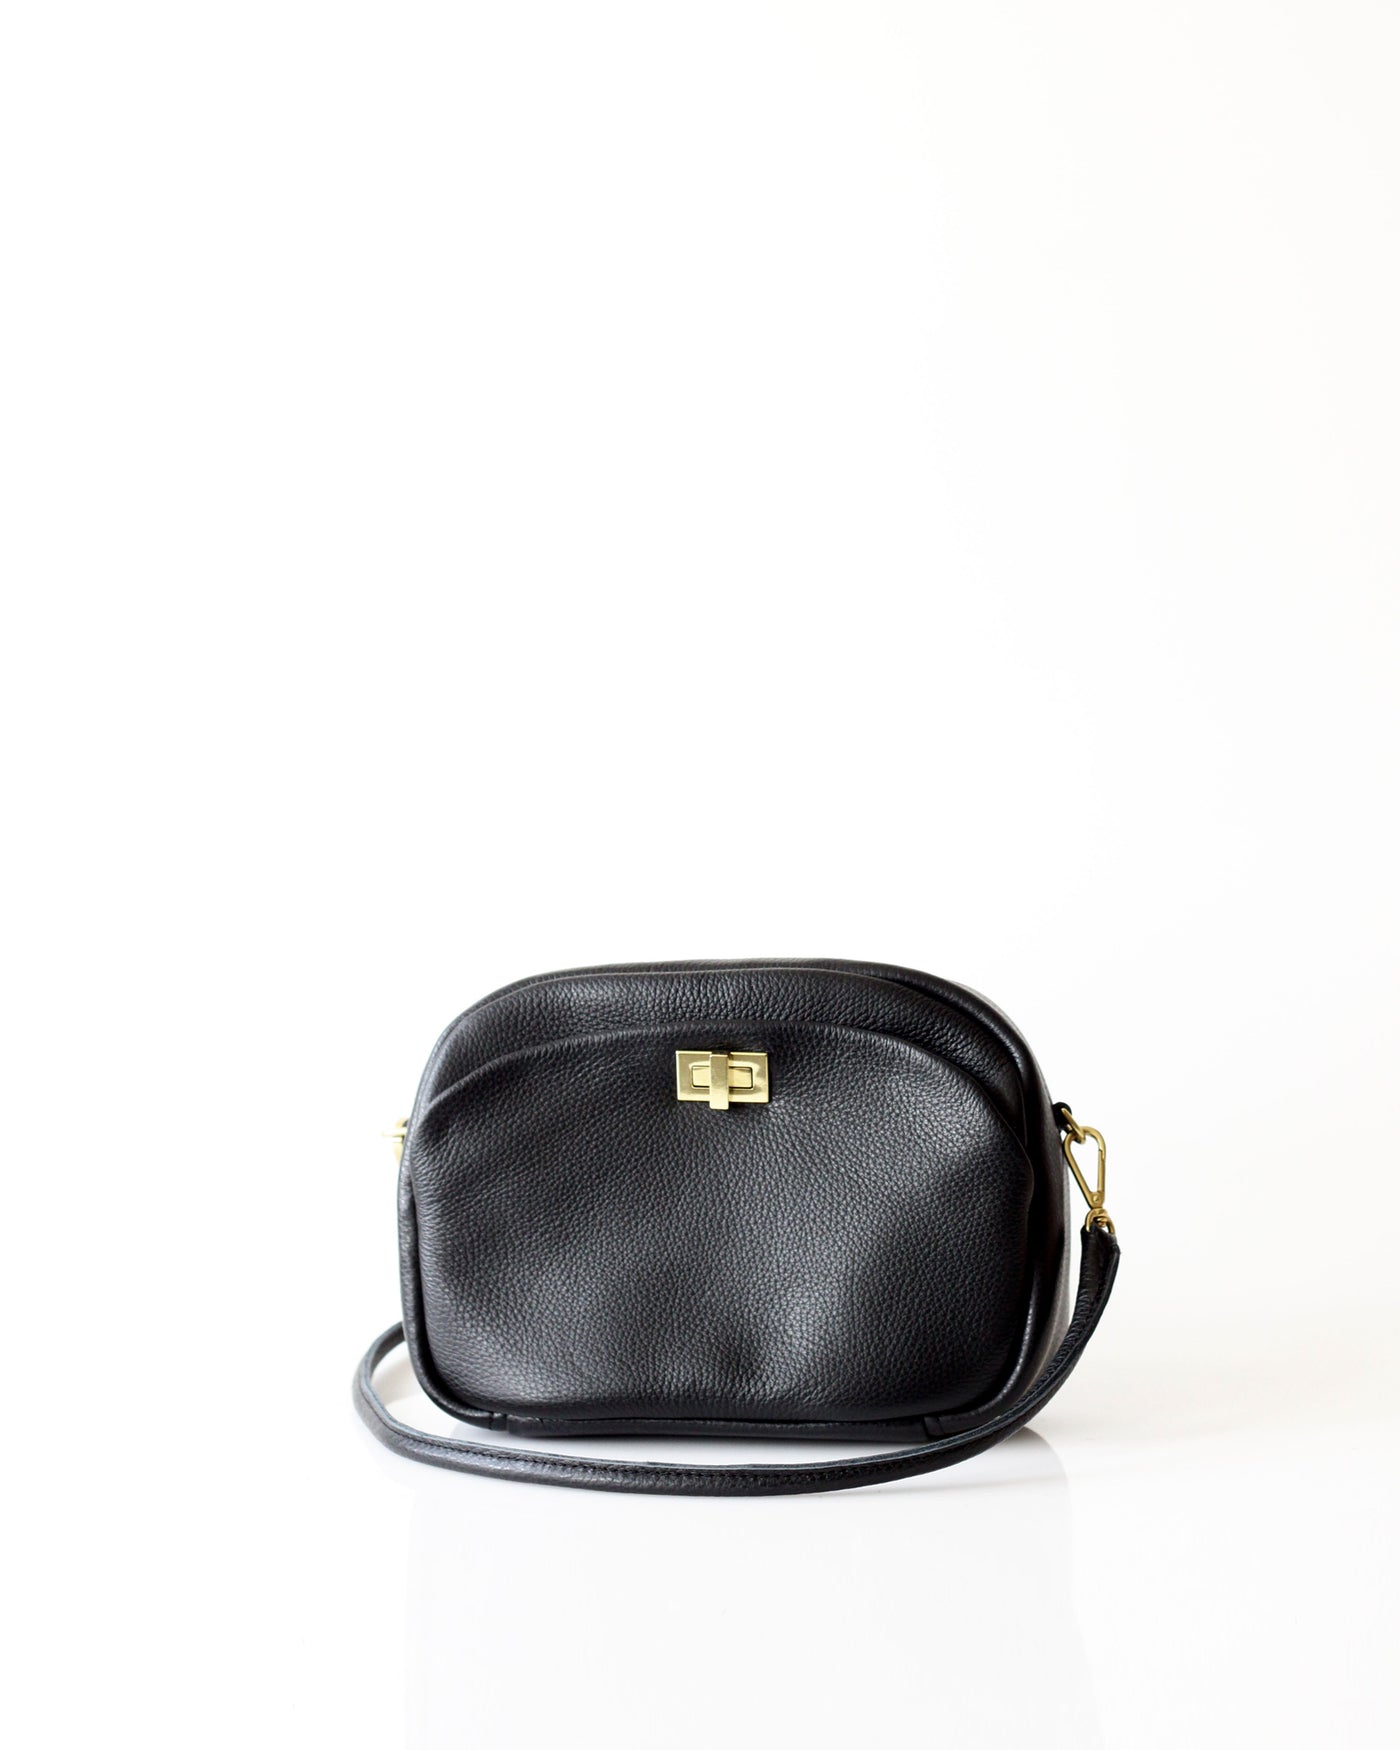 Calla Crossbody - Opelle bag Permanent Collection - Opelle leather handbag handcrafted leather bag toronto Canada